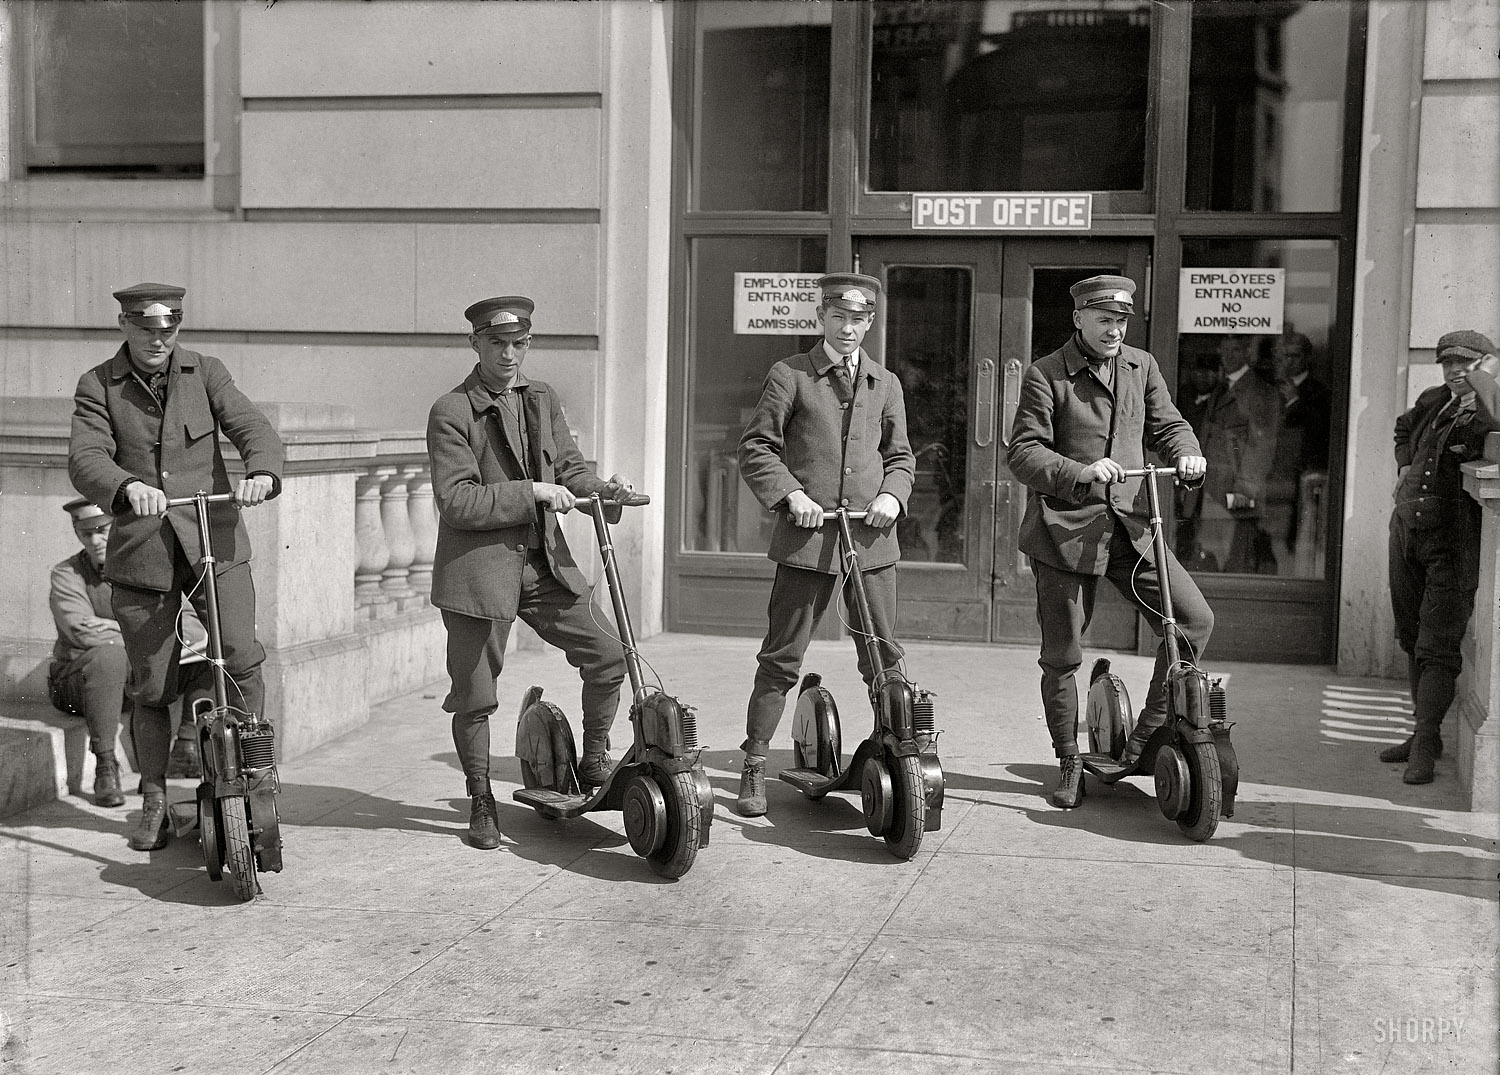 Washington, D.C., circa 1917. "Post Office postmen on scooters." Kind of a Segway vibe here. Harris & Ewing Collection glass negative. View full size.